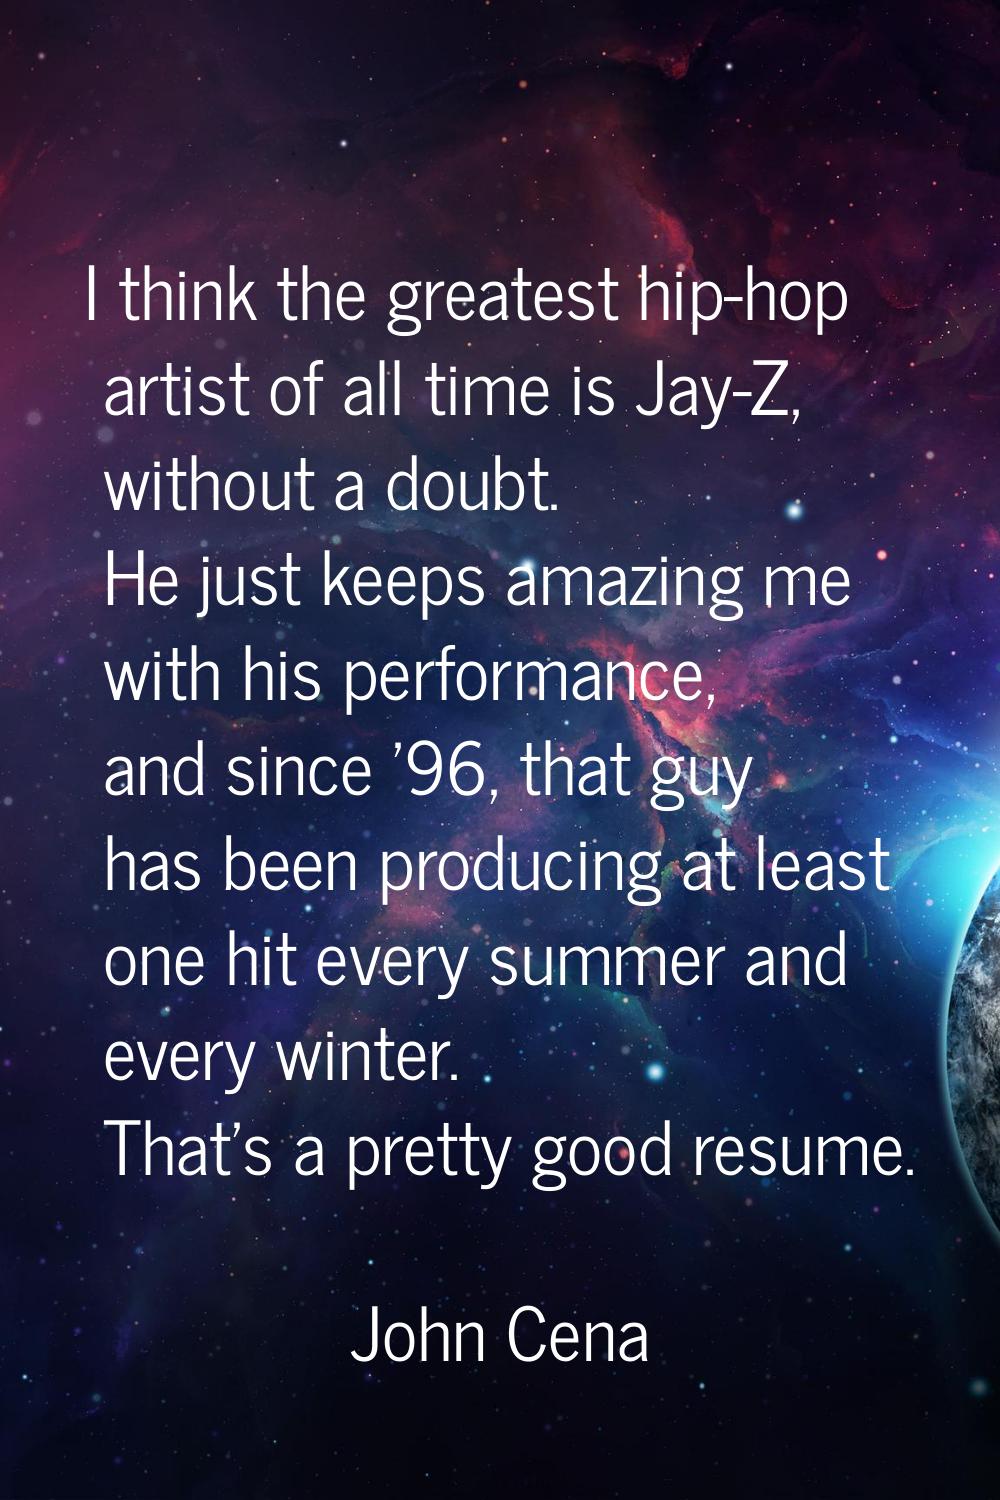 I think the greatest hip-hop artist of all time is Jay-Z, without a doubt. He just keeps amazing me